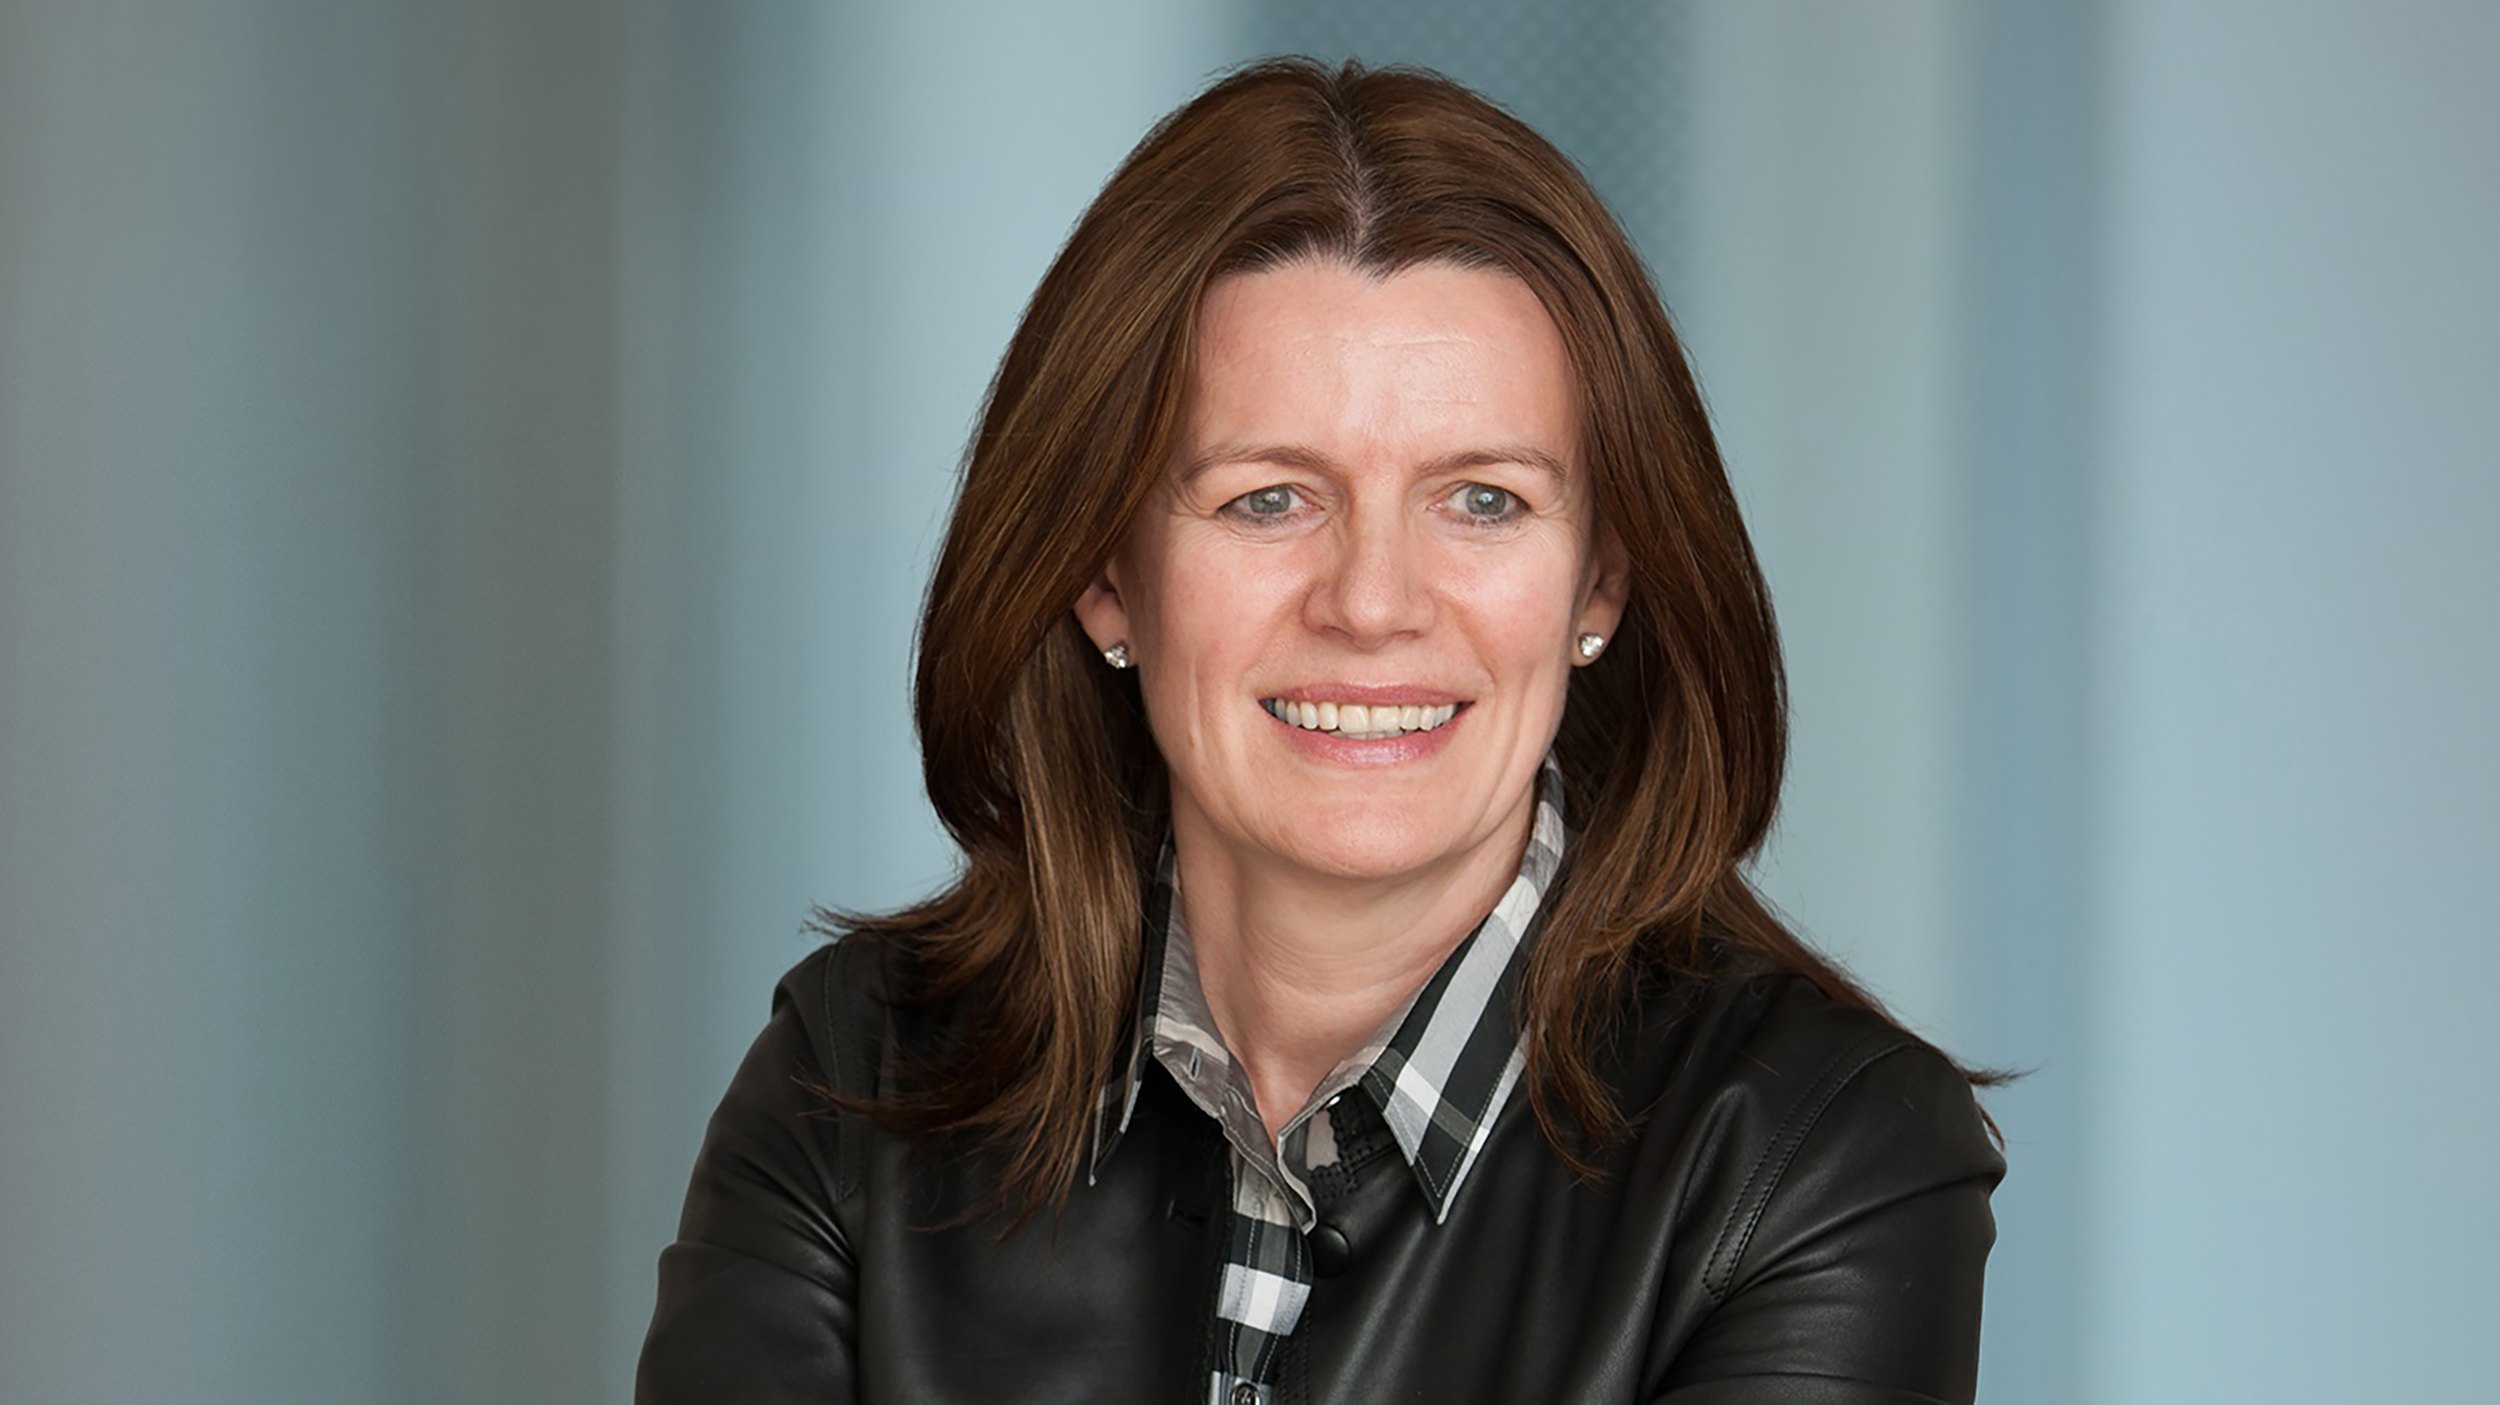 Diageo's GC Siobhan Moriarty Shares Diversity and Inclusion Strategies